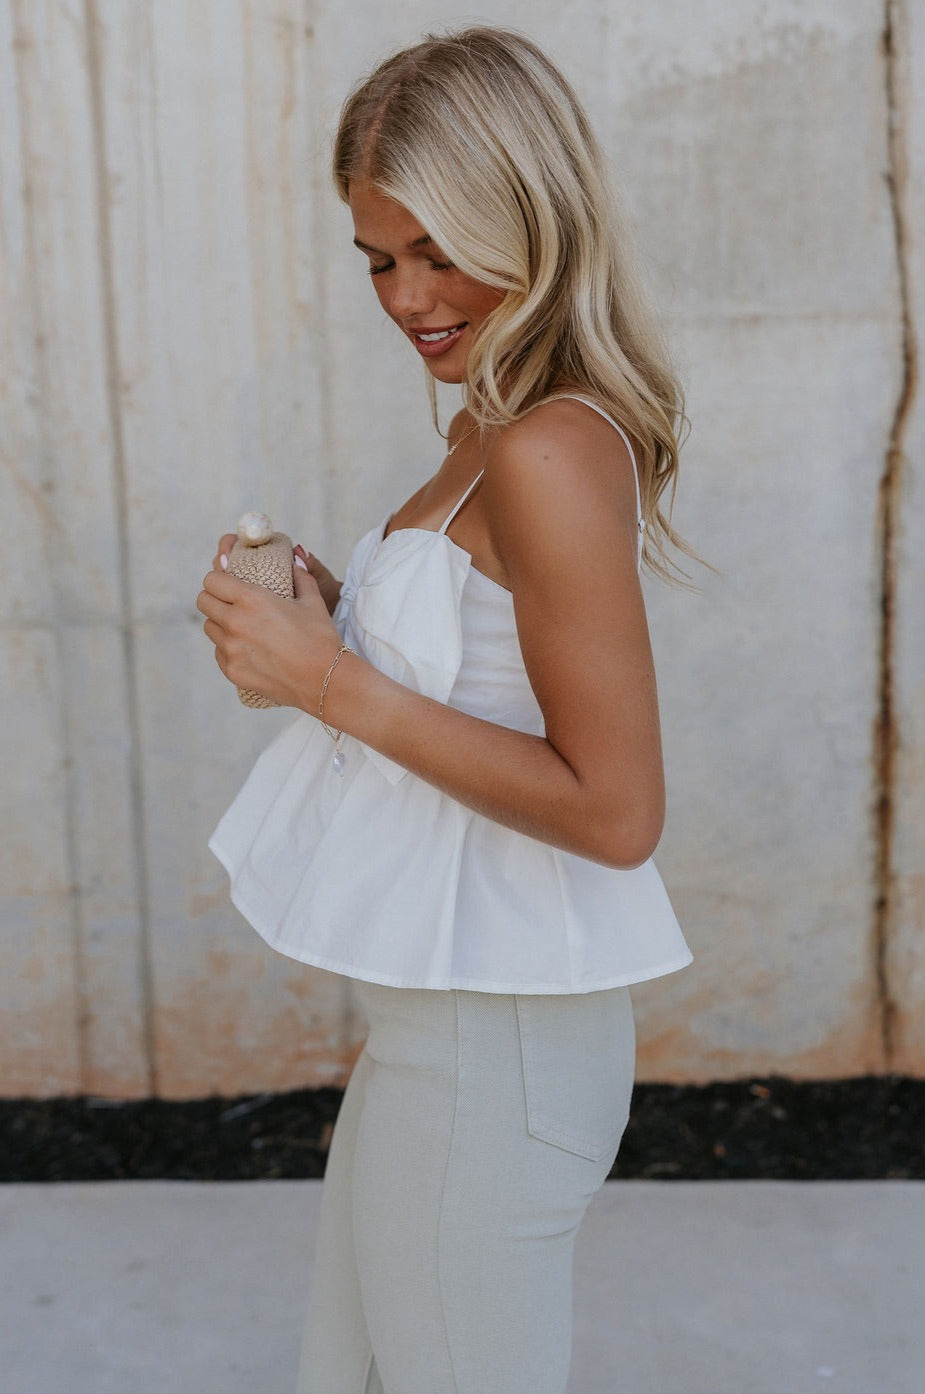 Side view of female model wearing the Alina Off White Bow Poplin Tank which features White Lightweight Fabric, Cropped Waist, Front Oversized Bow Detail, Adjustable Straps and Monochrome Back Zipper with Hook Closure